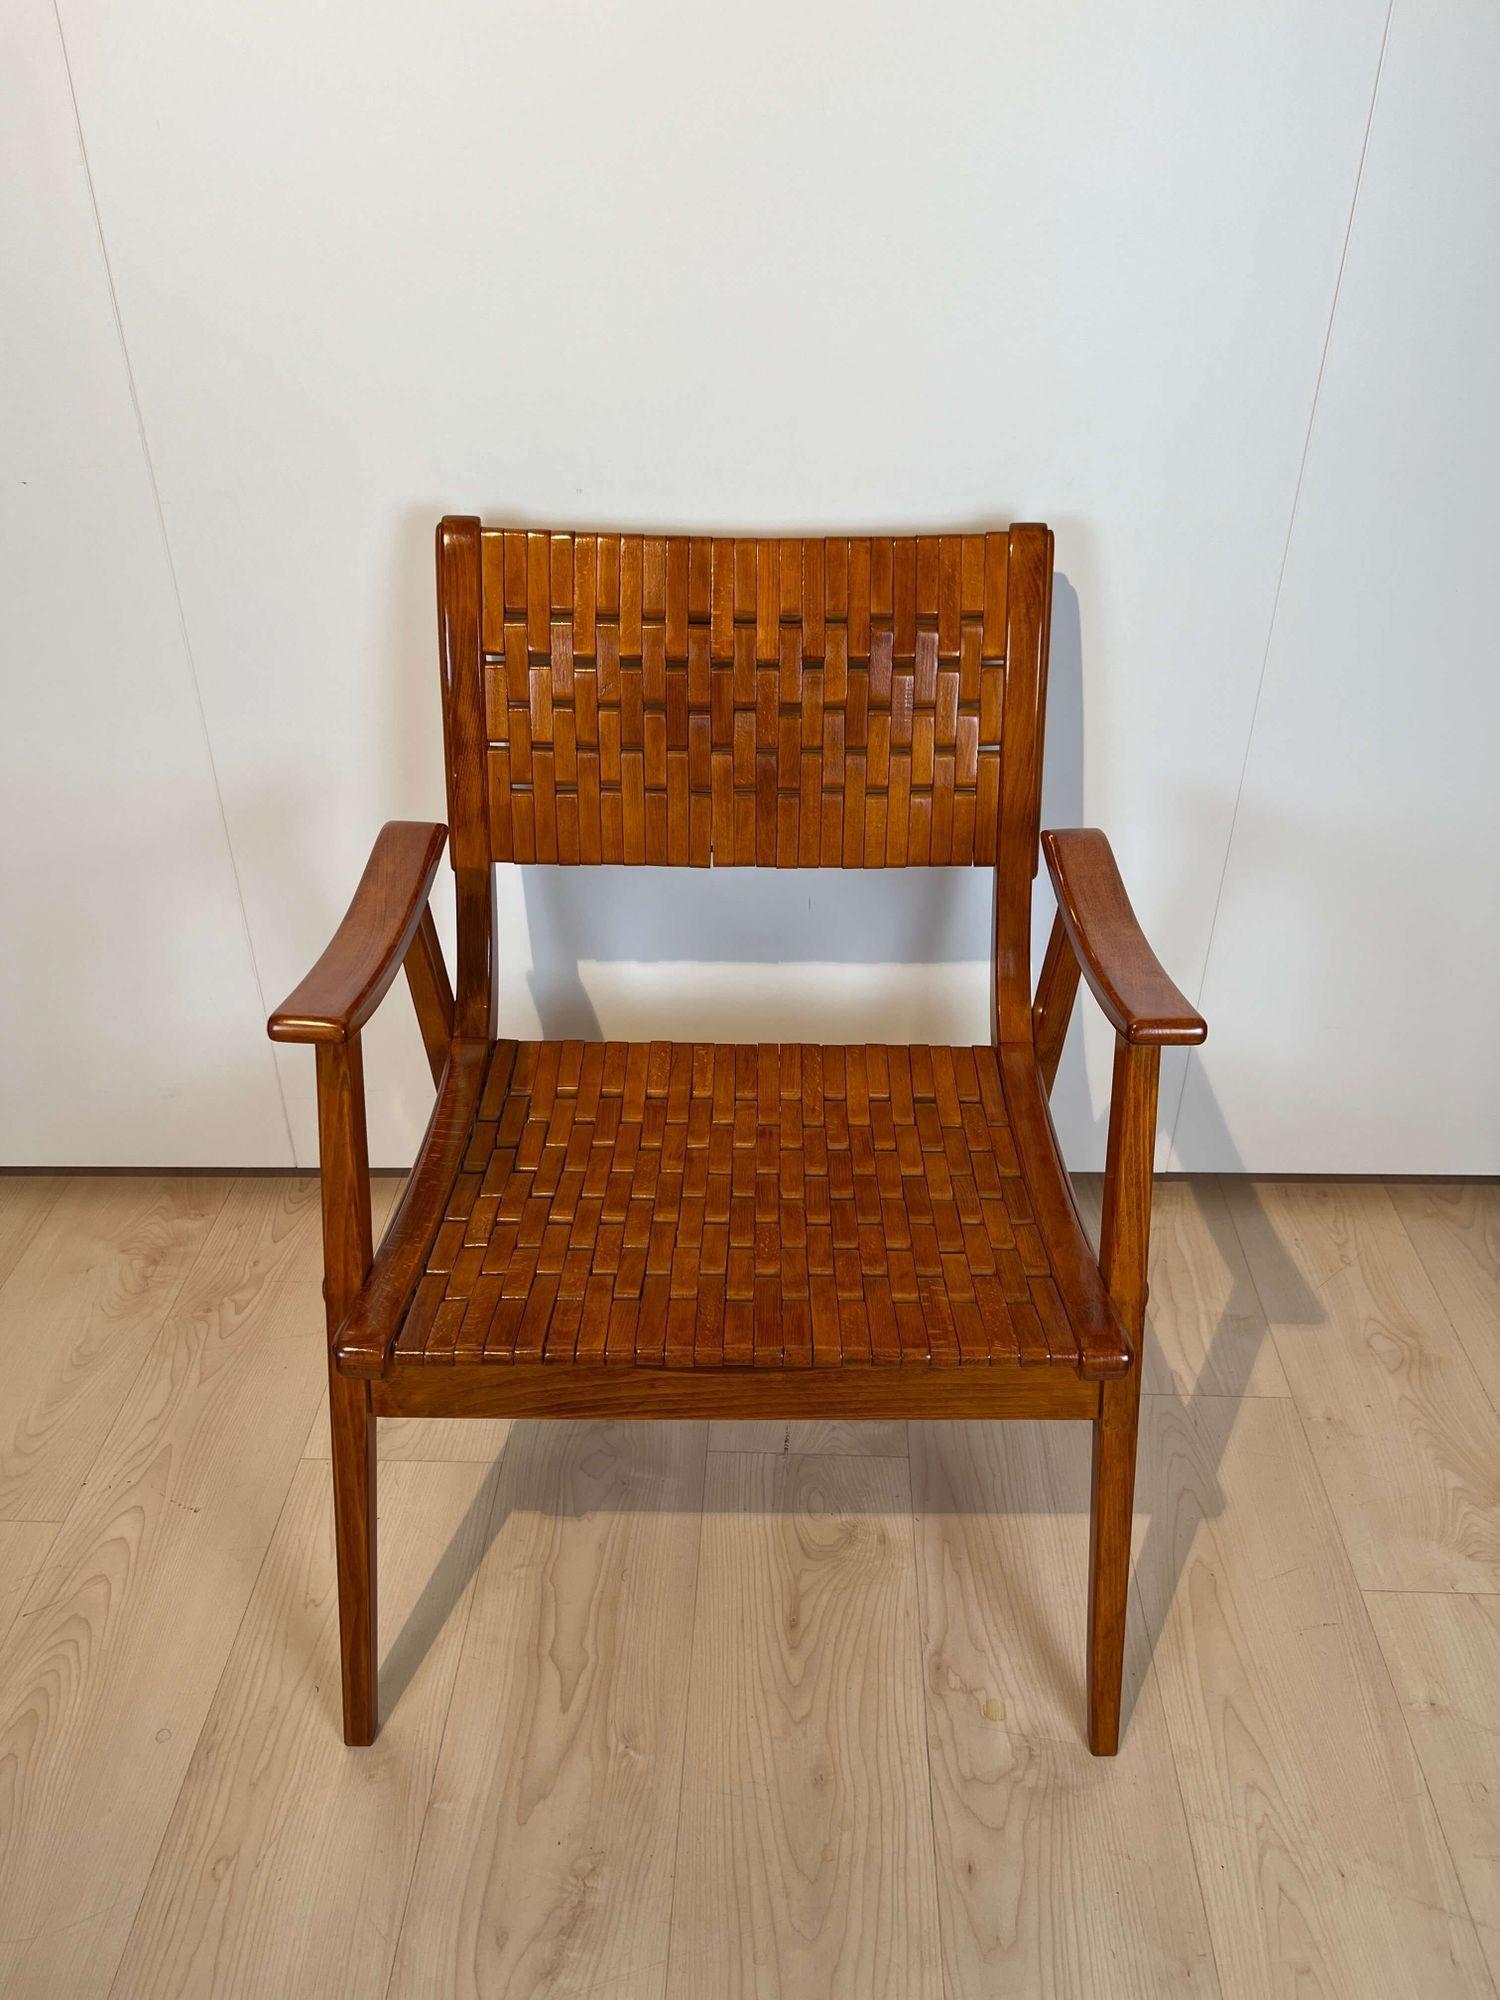 Polished Bauhaus Armchair by Gelenka, Beech and Plywood, Elastic Seat, Germany ca. 1930s